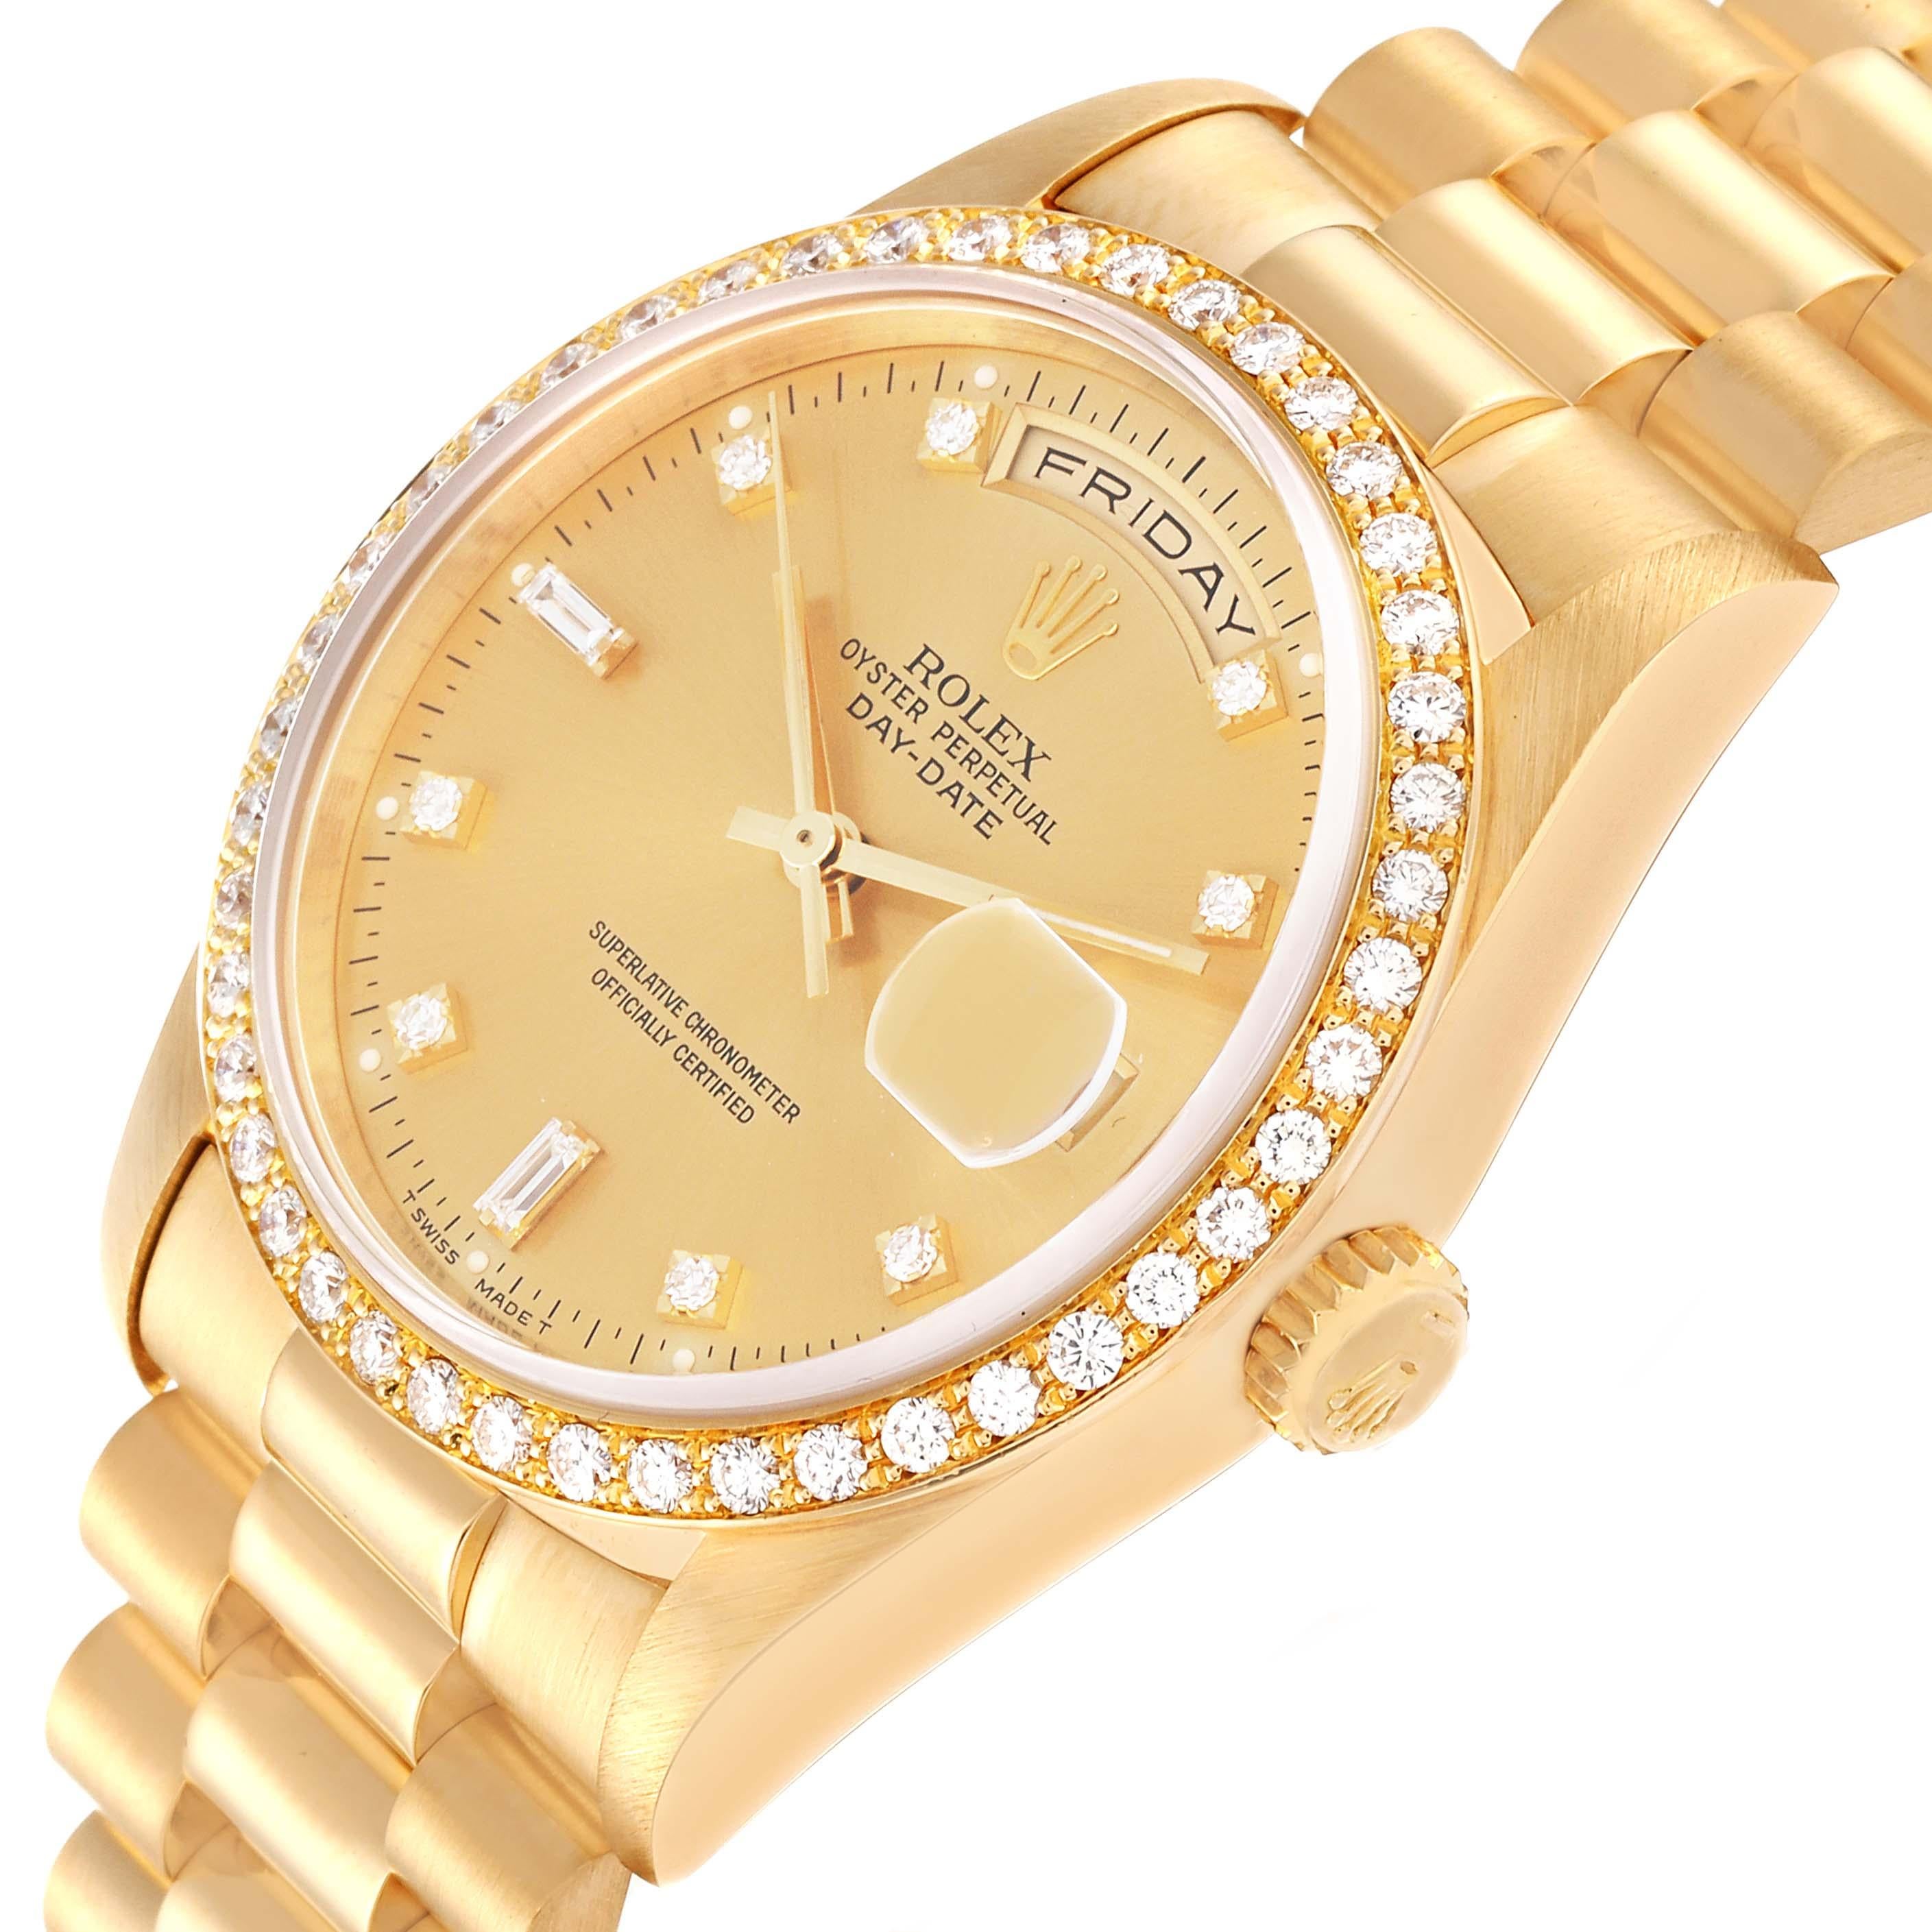 Rolex President Day Date 36mm Yellow Gold Diamond Mens Watch 18348 For Sale 2